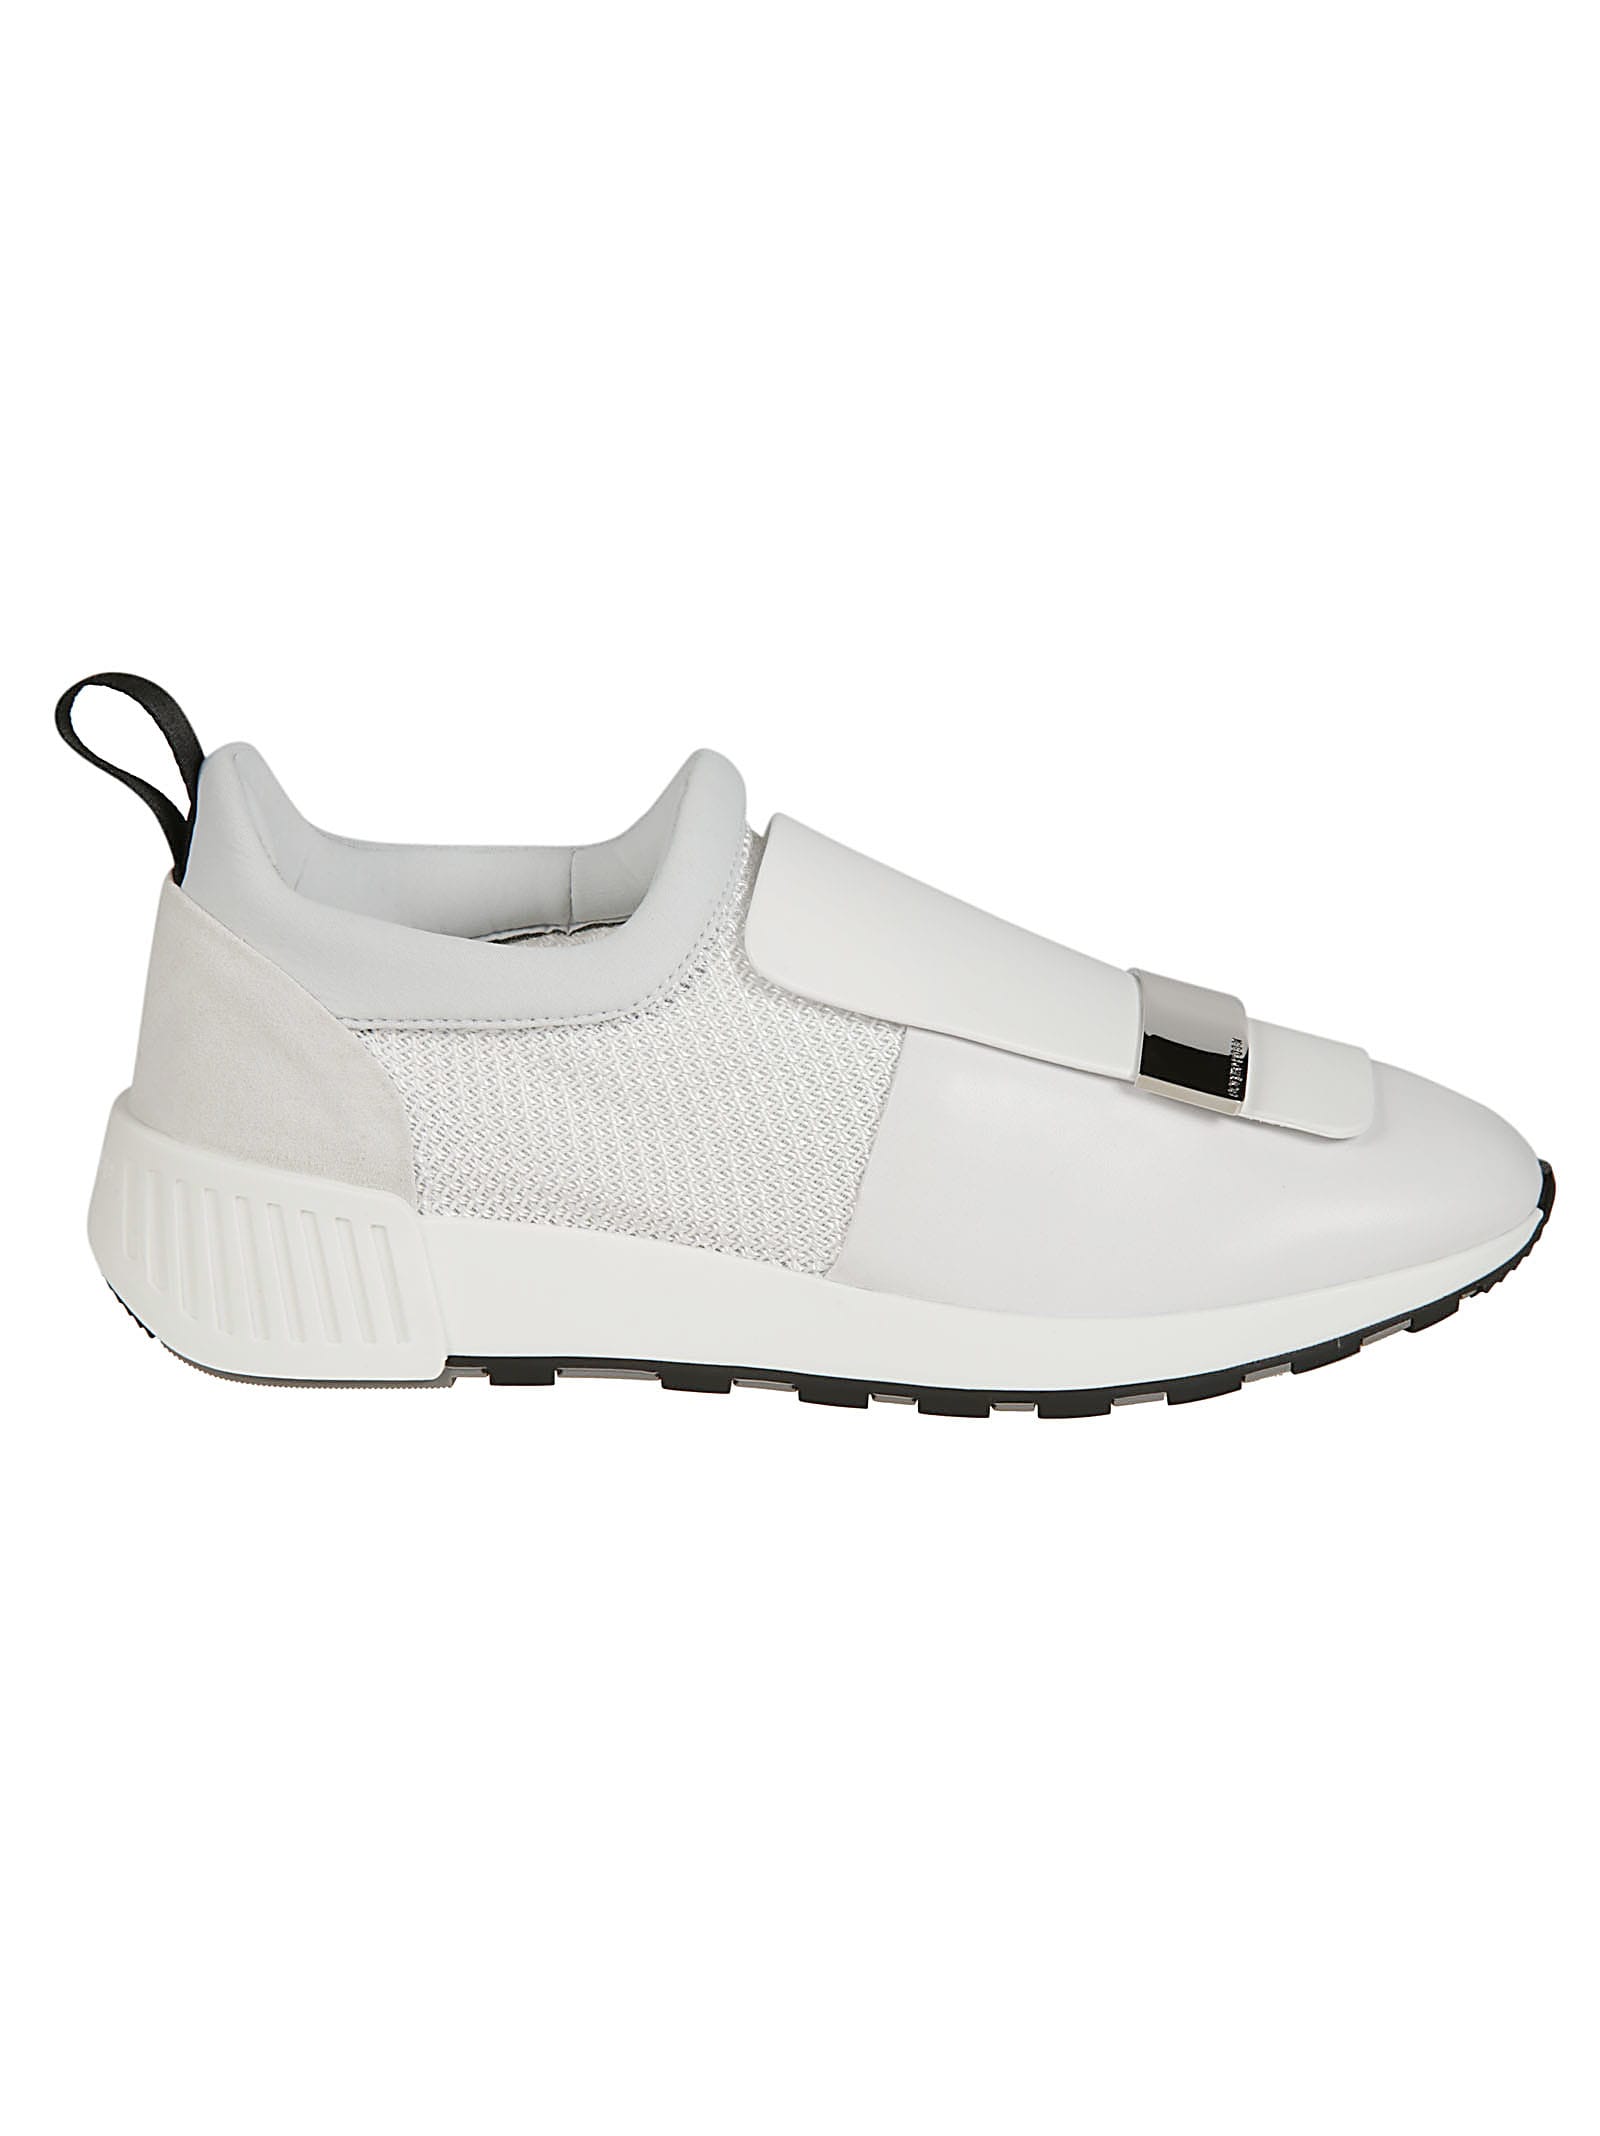 Buy Sergio Rossi Front Flap Sneakers online, shop Sergio Rossi shoes with free shipping